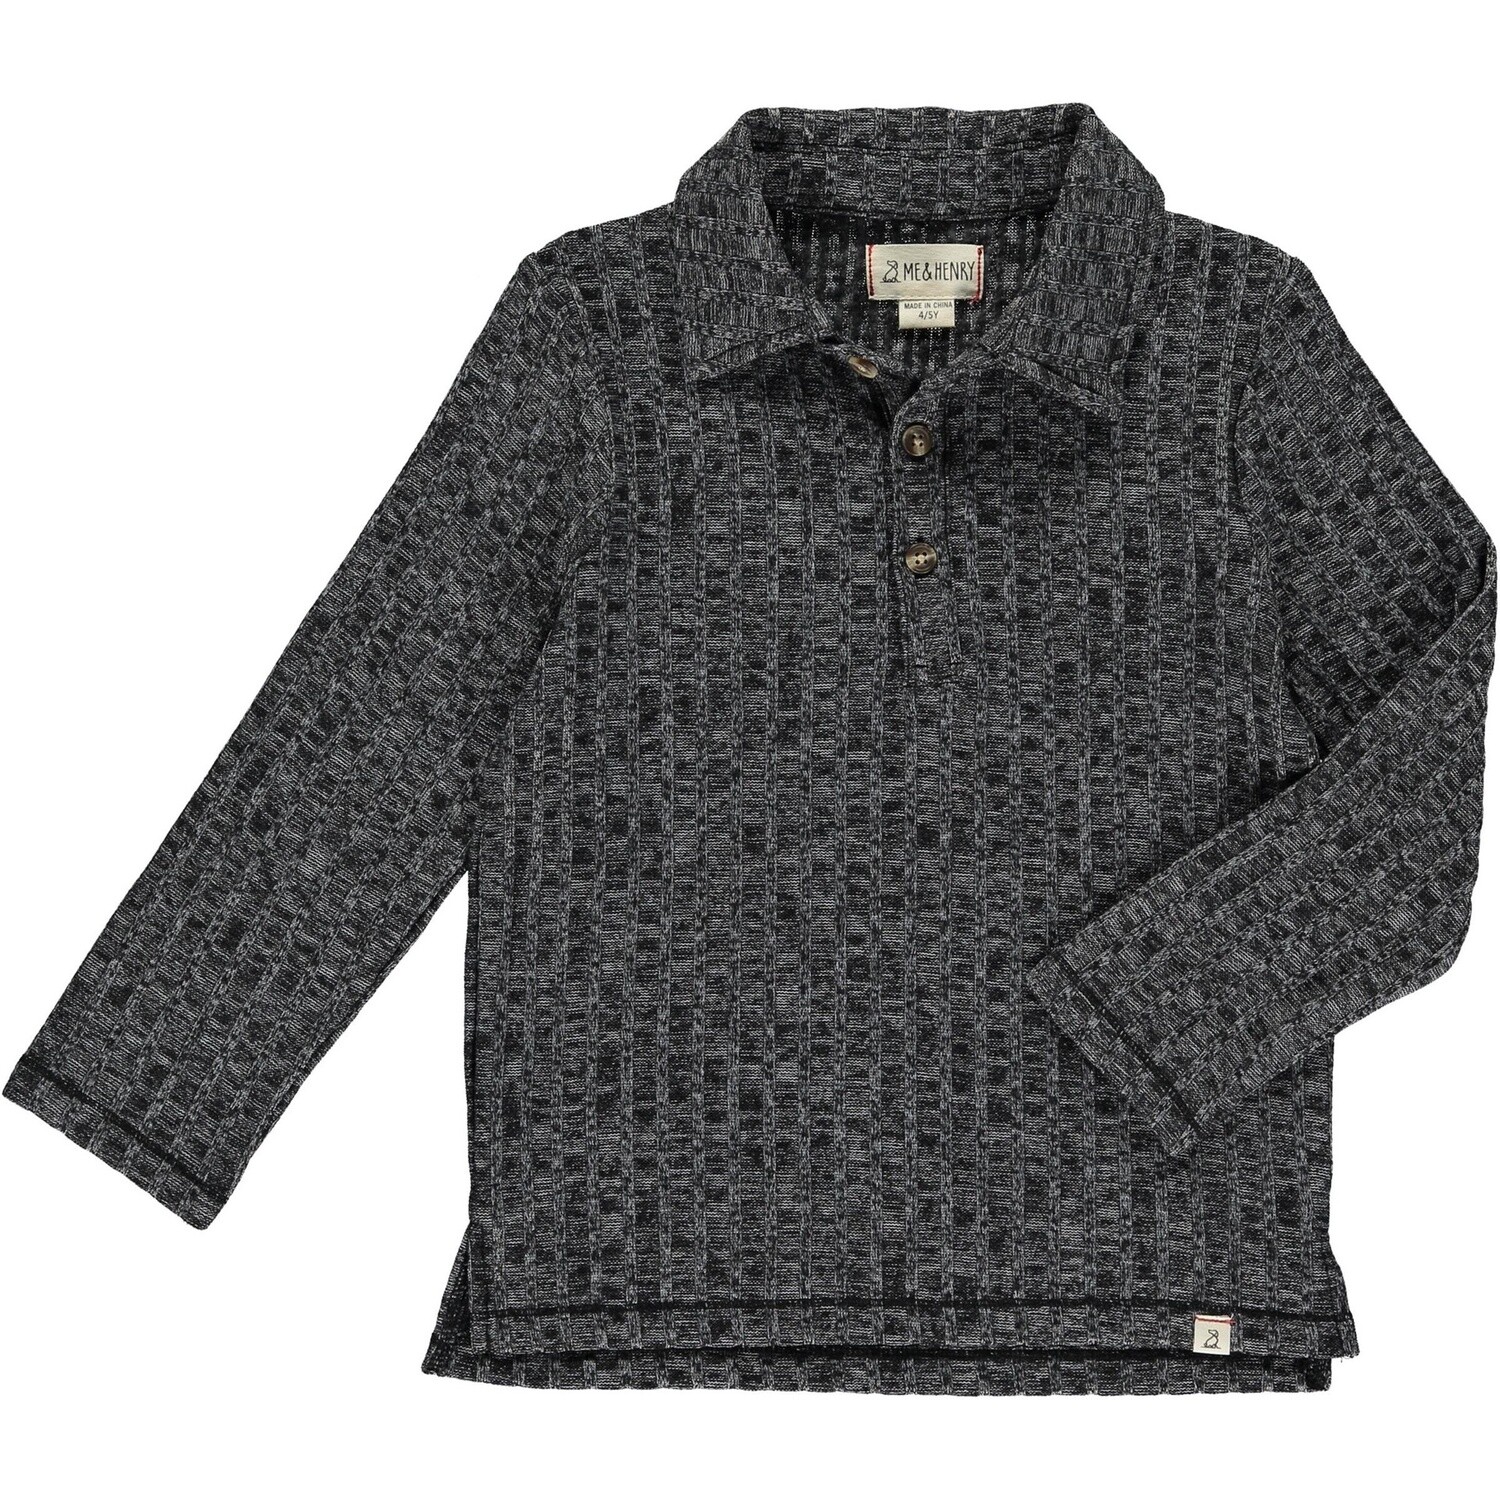 L/S Knit Sweater Polo